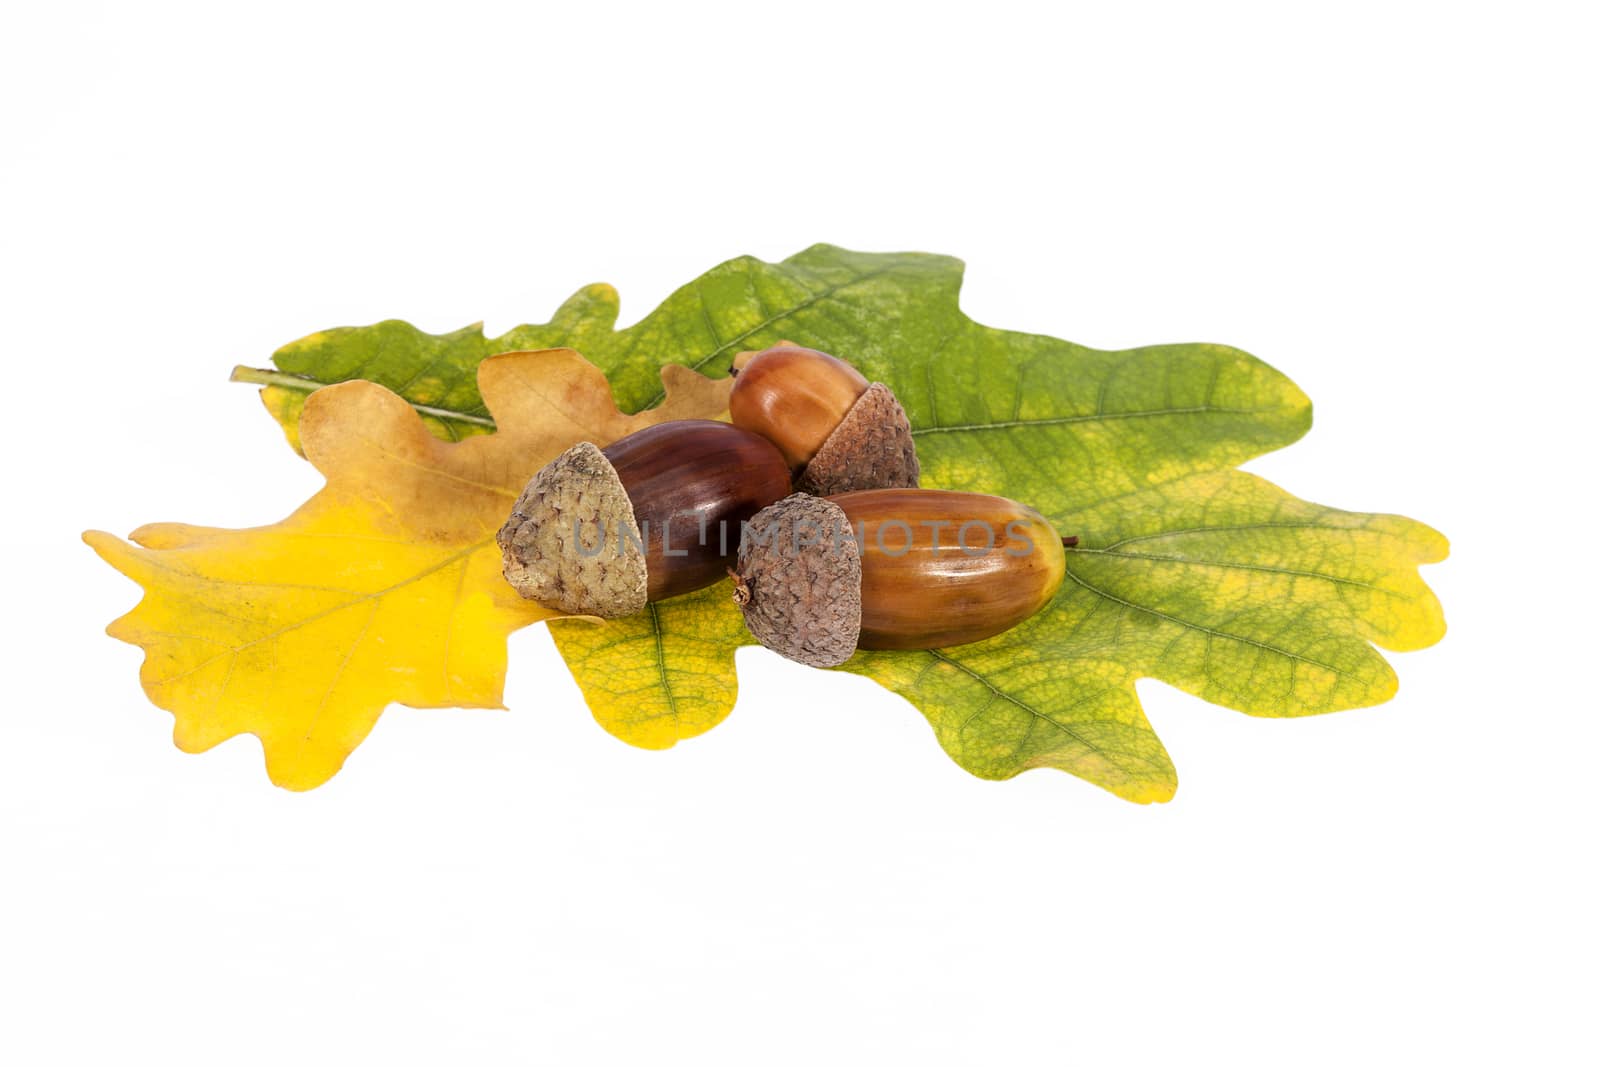  Acorns on oak leaves in autumnal colors, close up by mychadre77